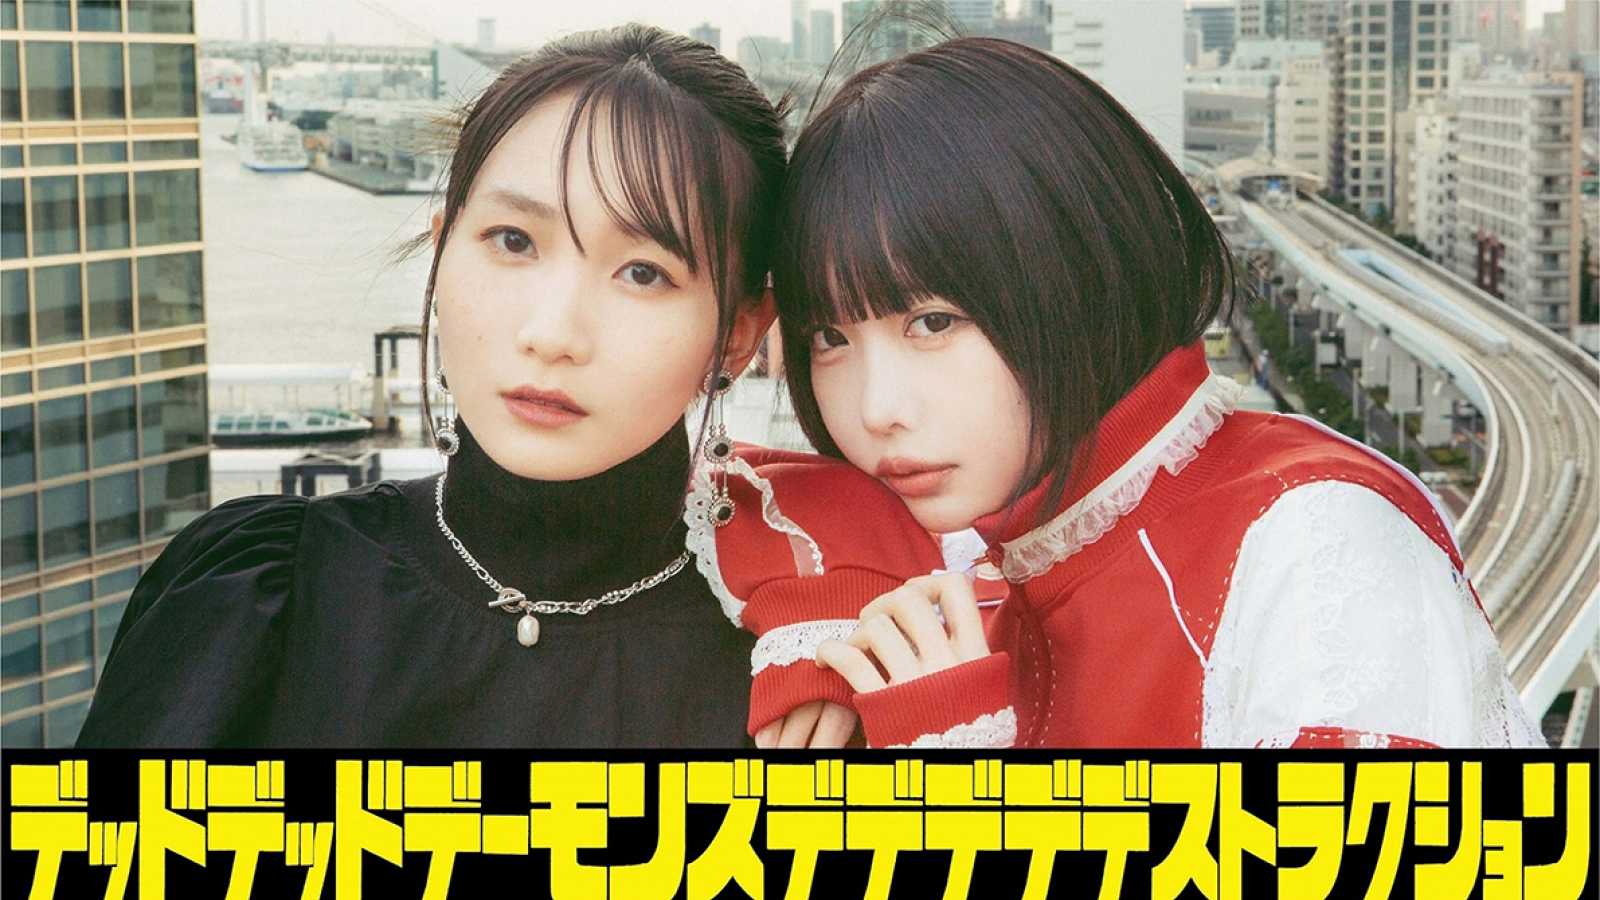 New Collaboration Single from ano and Lilas Ikuta  © Inio Asano / Shogakukan/ DeDeDeDe Committee. All rights reserved.